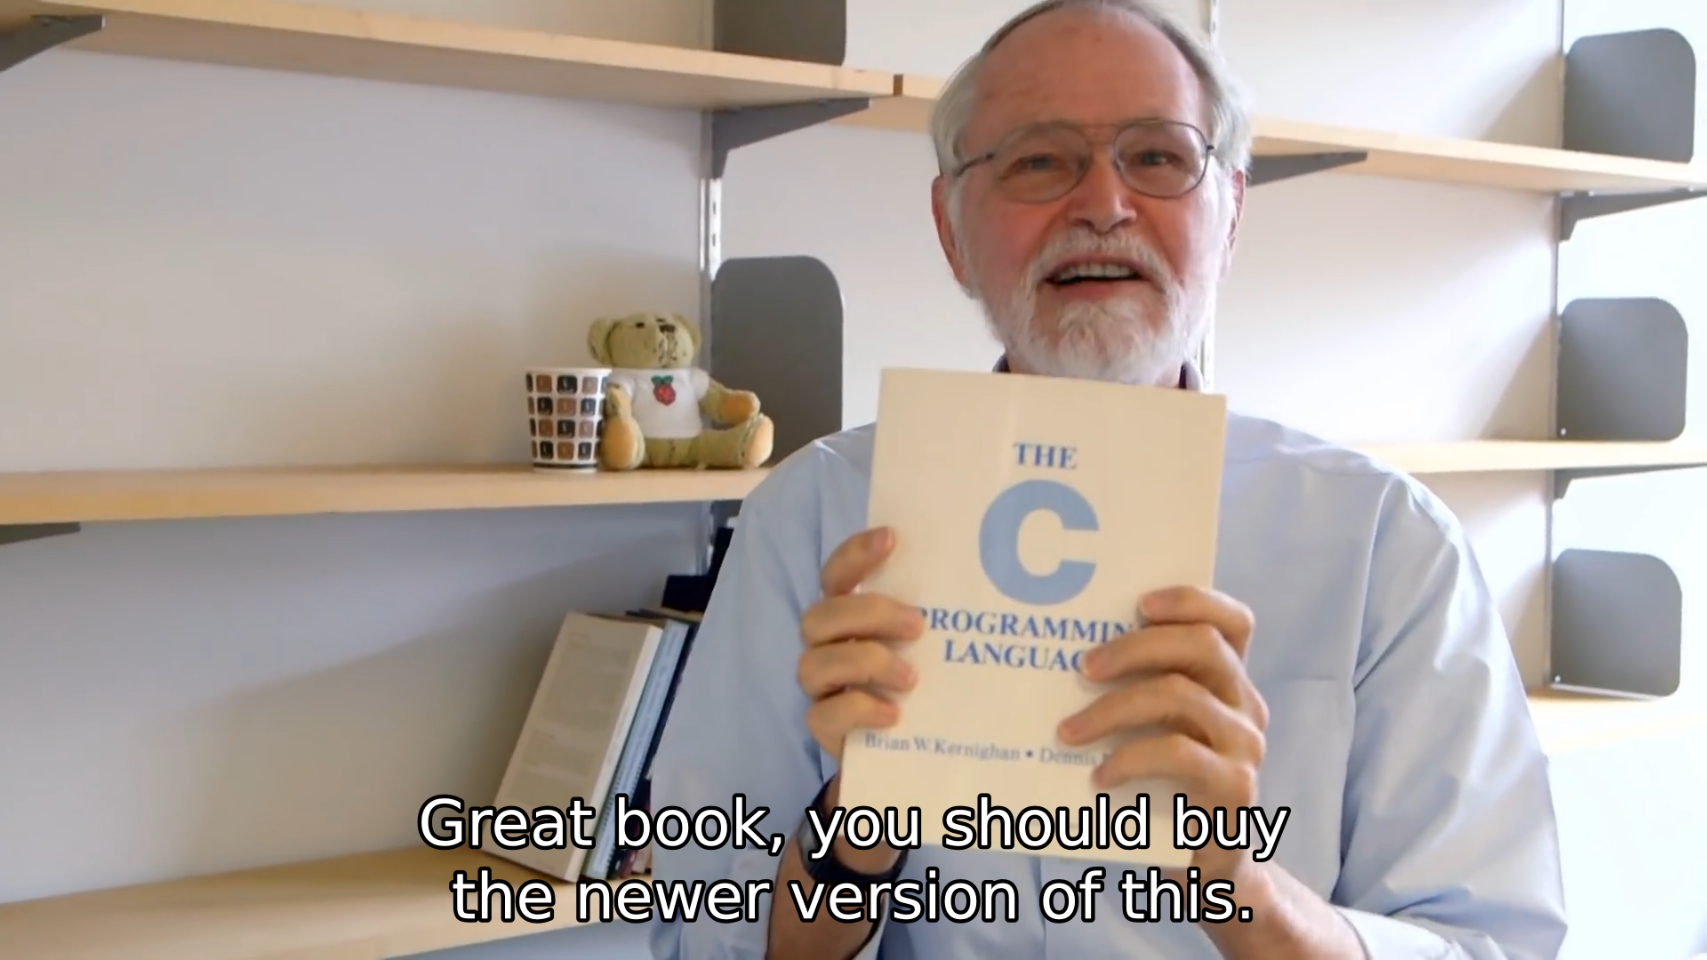 Brian Kernighan holds up the book "The C Programming Language" by Brian W. Kernighan and Dennis M. Ritchie. The subtitle says "Great book, you should buy the newer version of this."